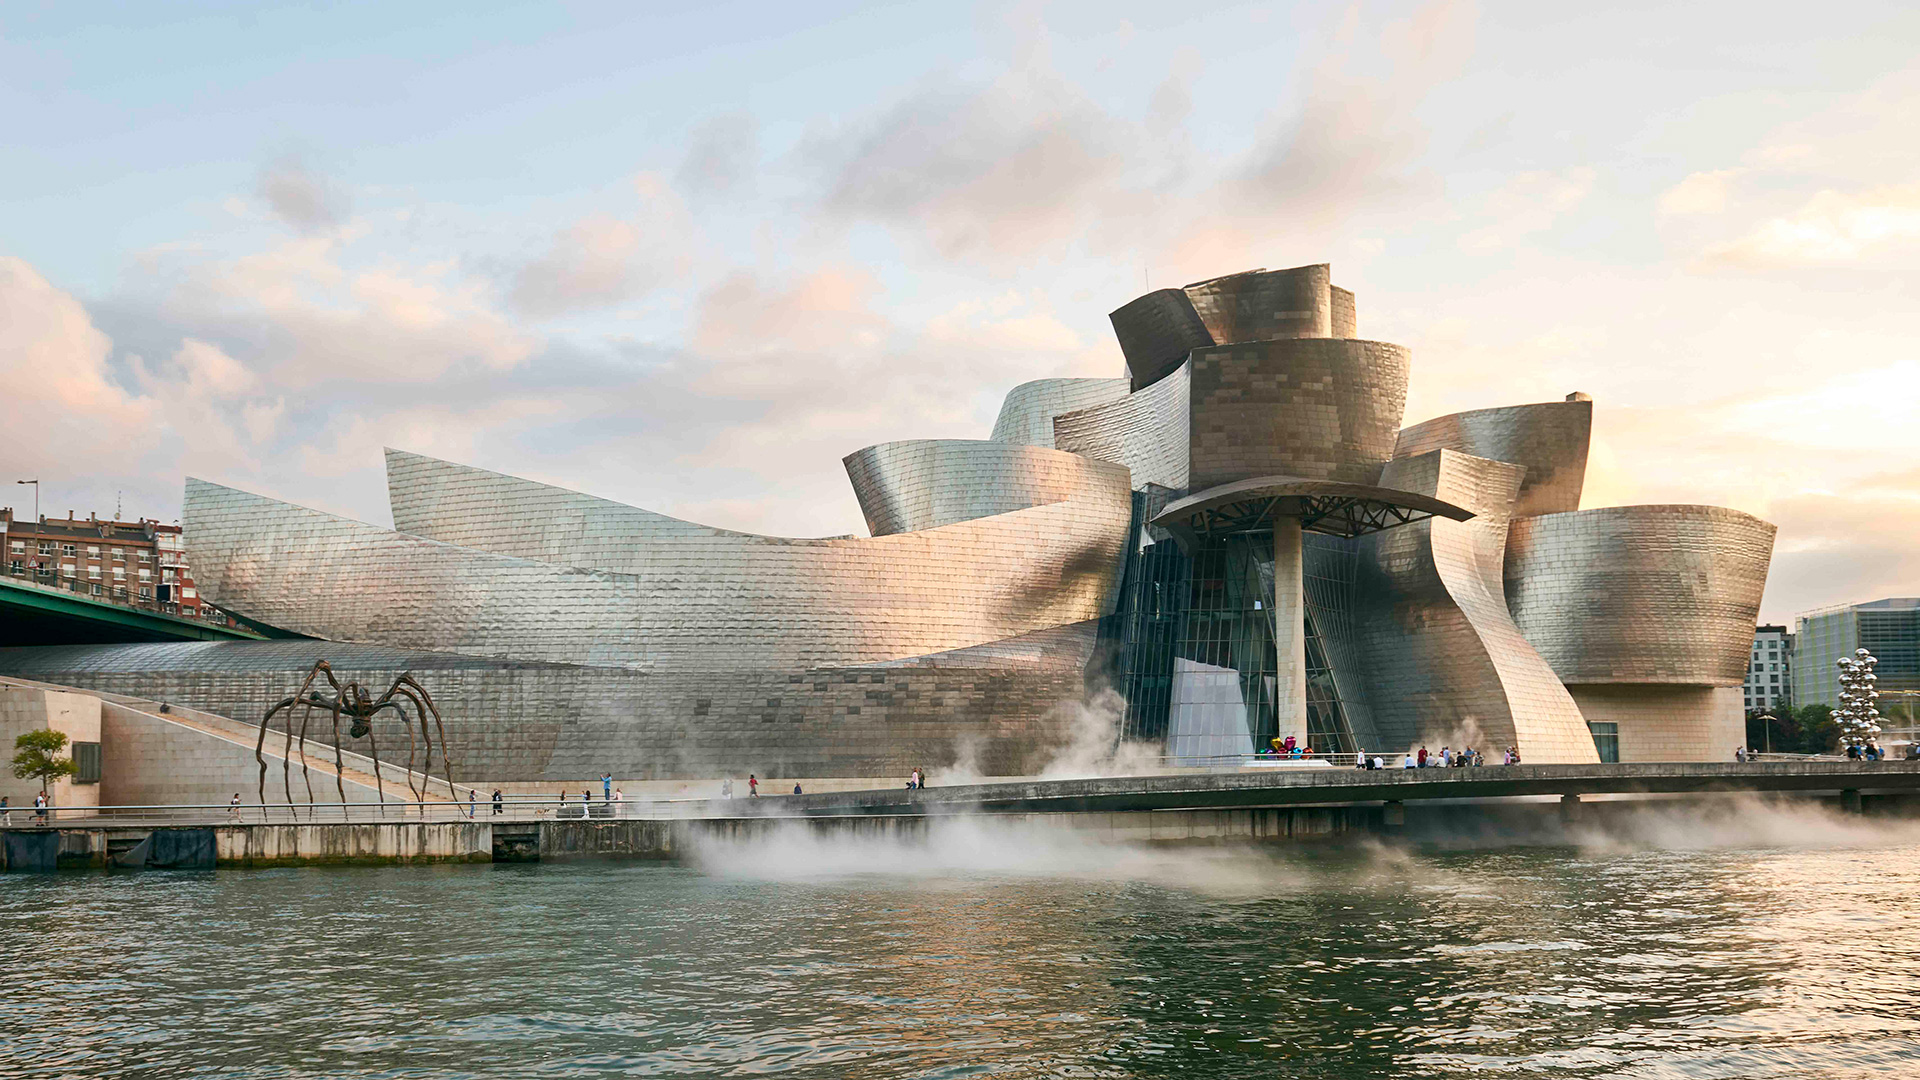 Guggenheim Bilbao Museum. Come in and plan your visit